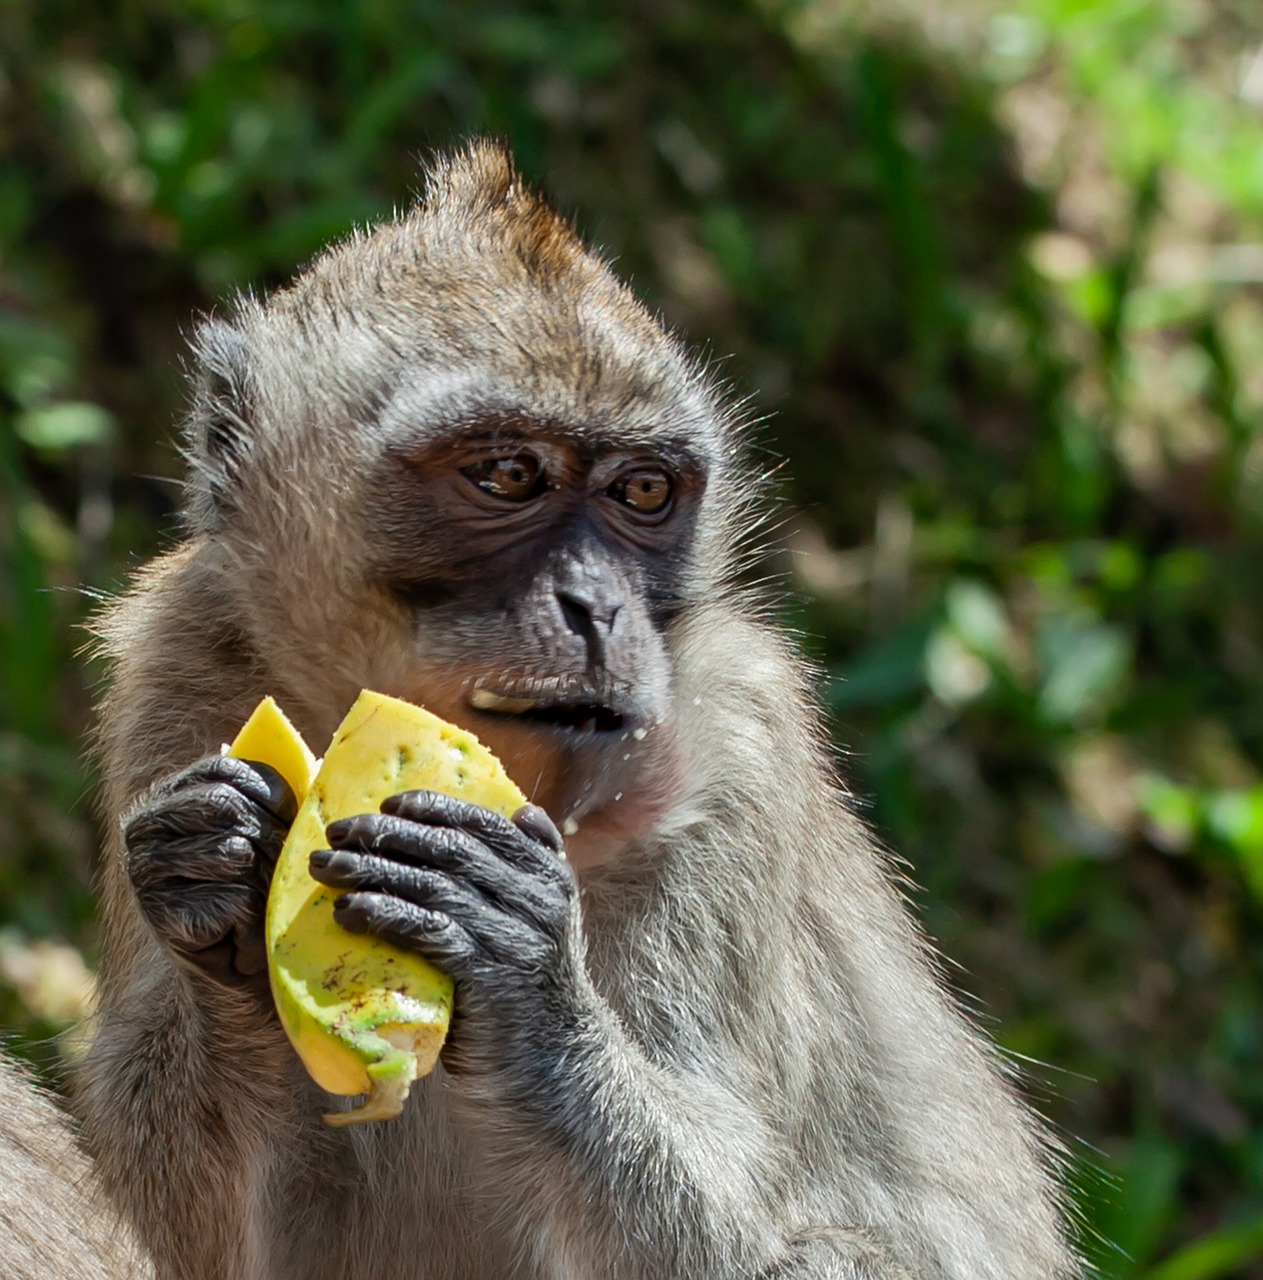 A long-tailed macaque eating a yellow fruit